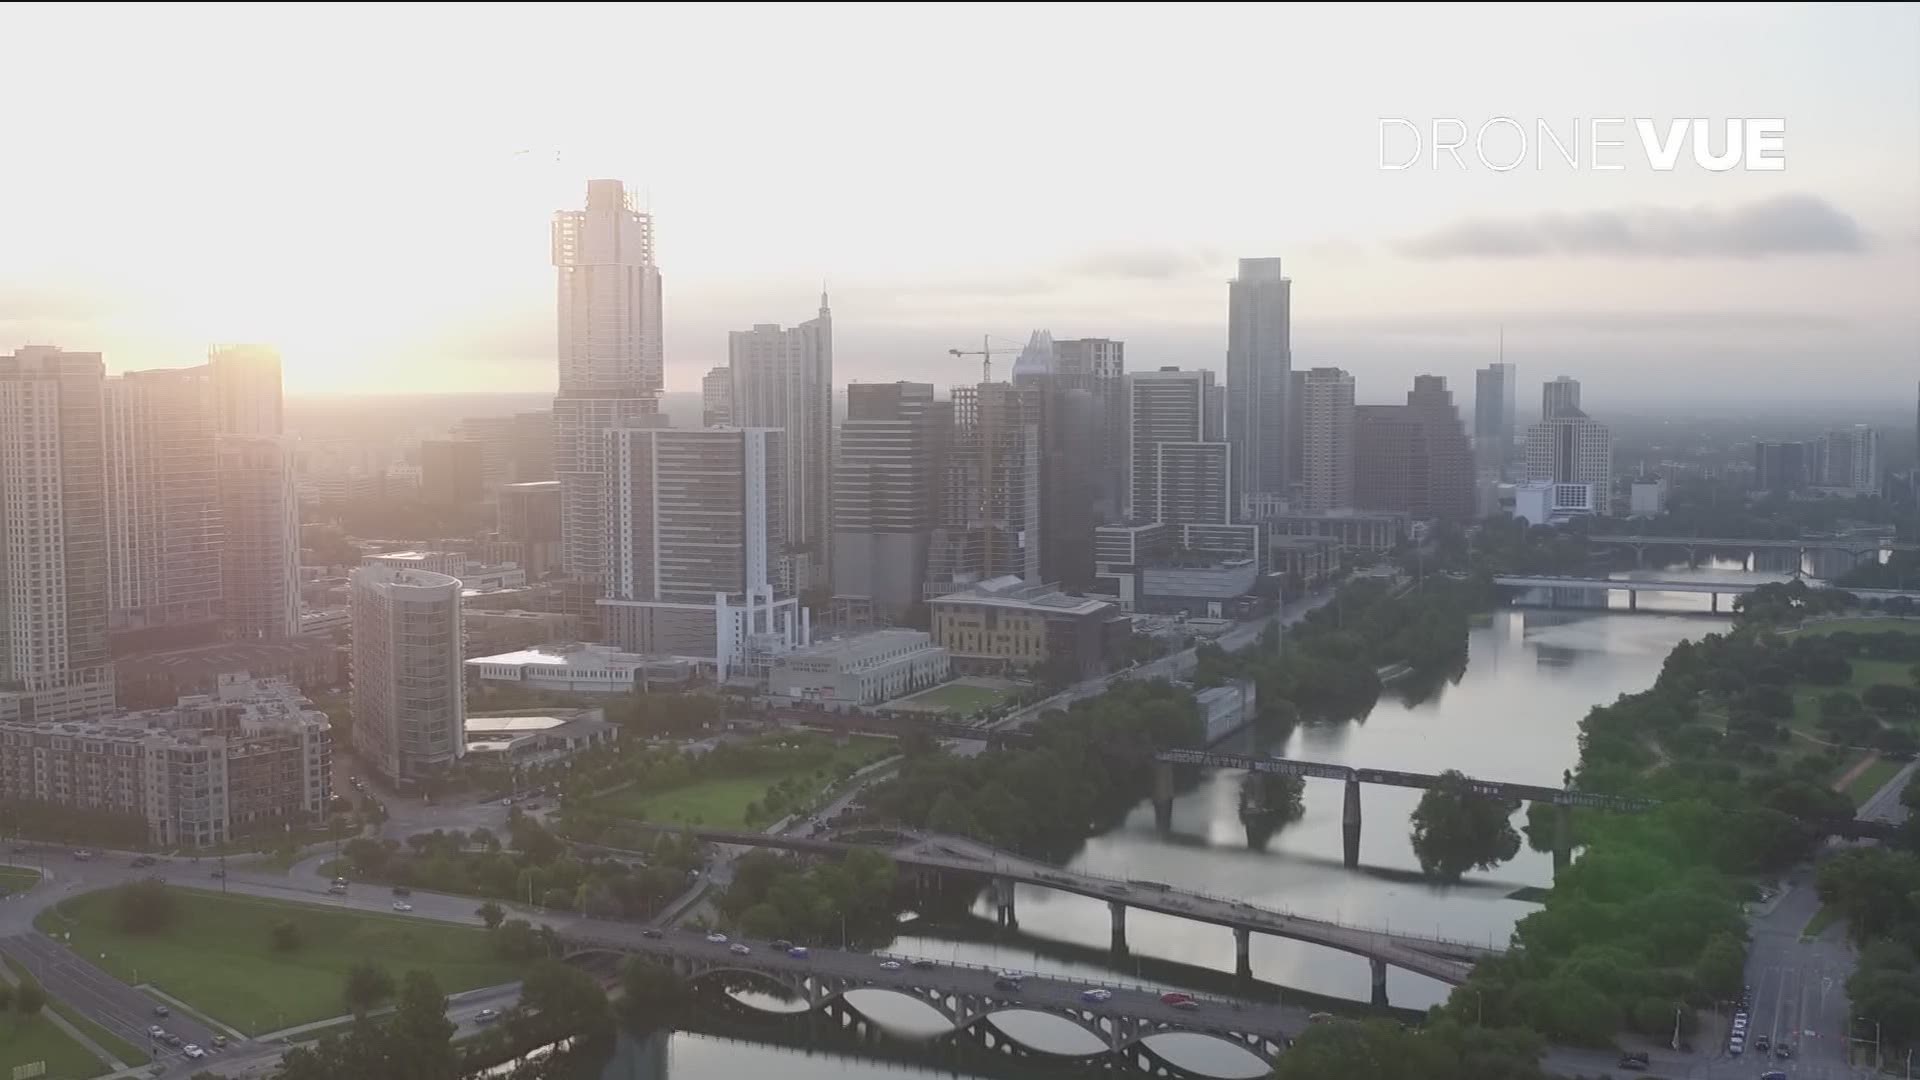 A new study from move.org says Austin is the least livable city in the U.S.